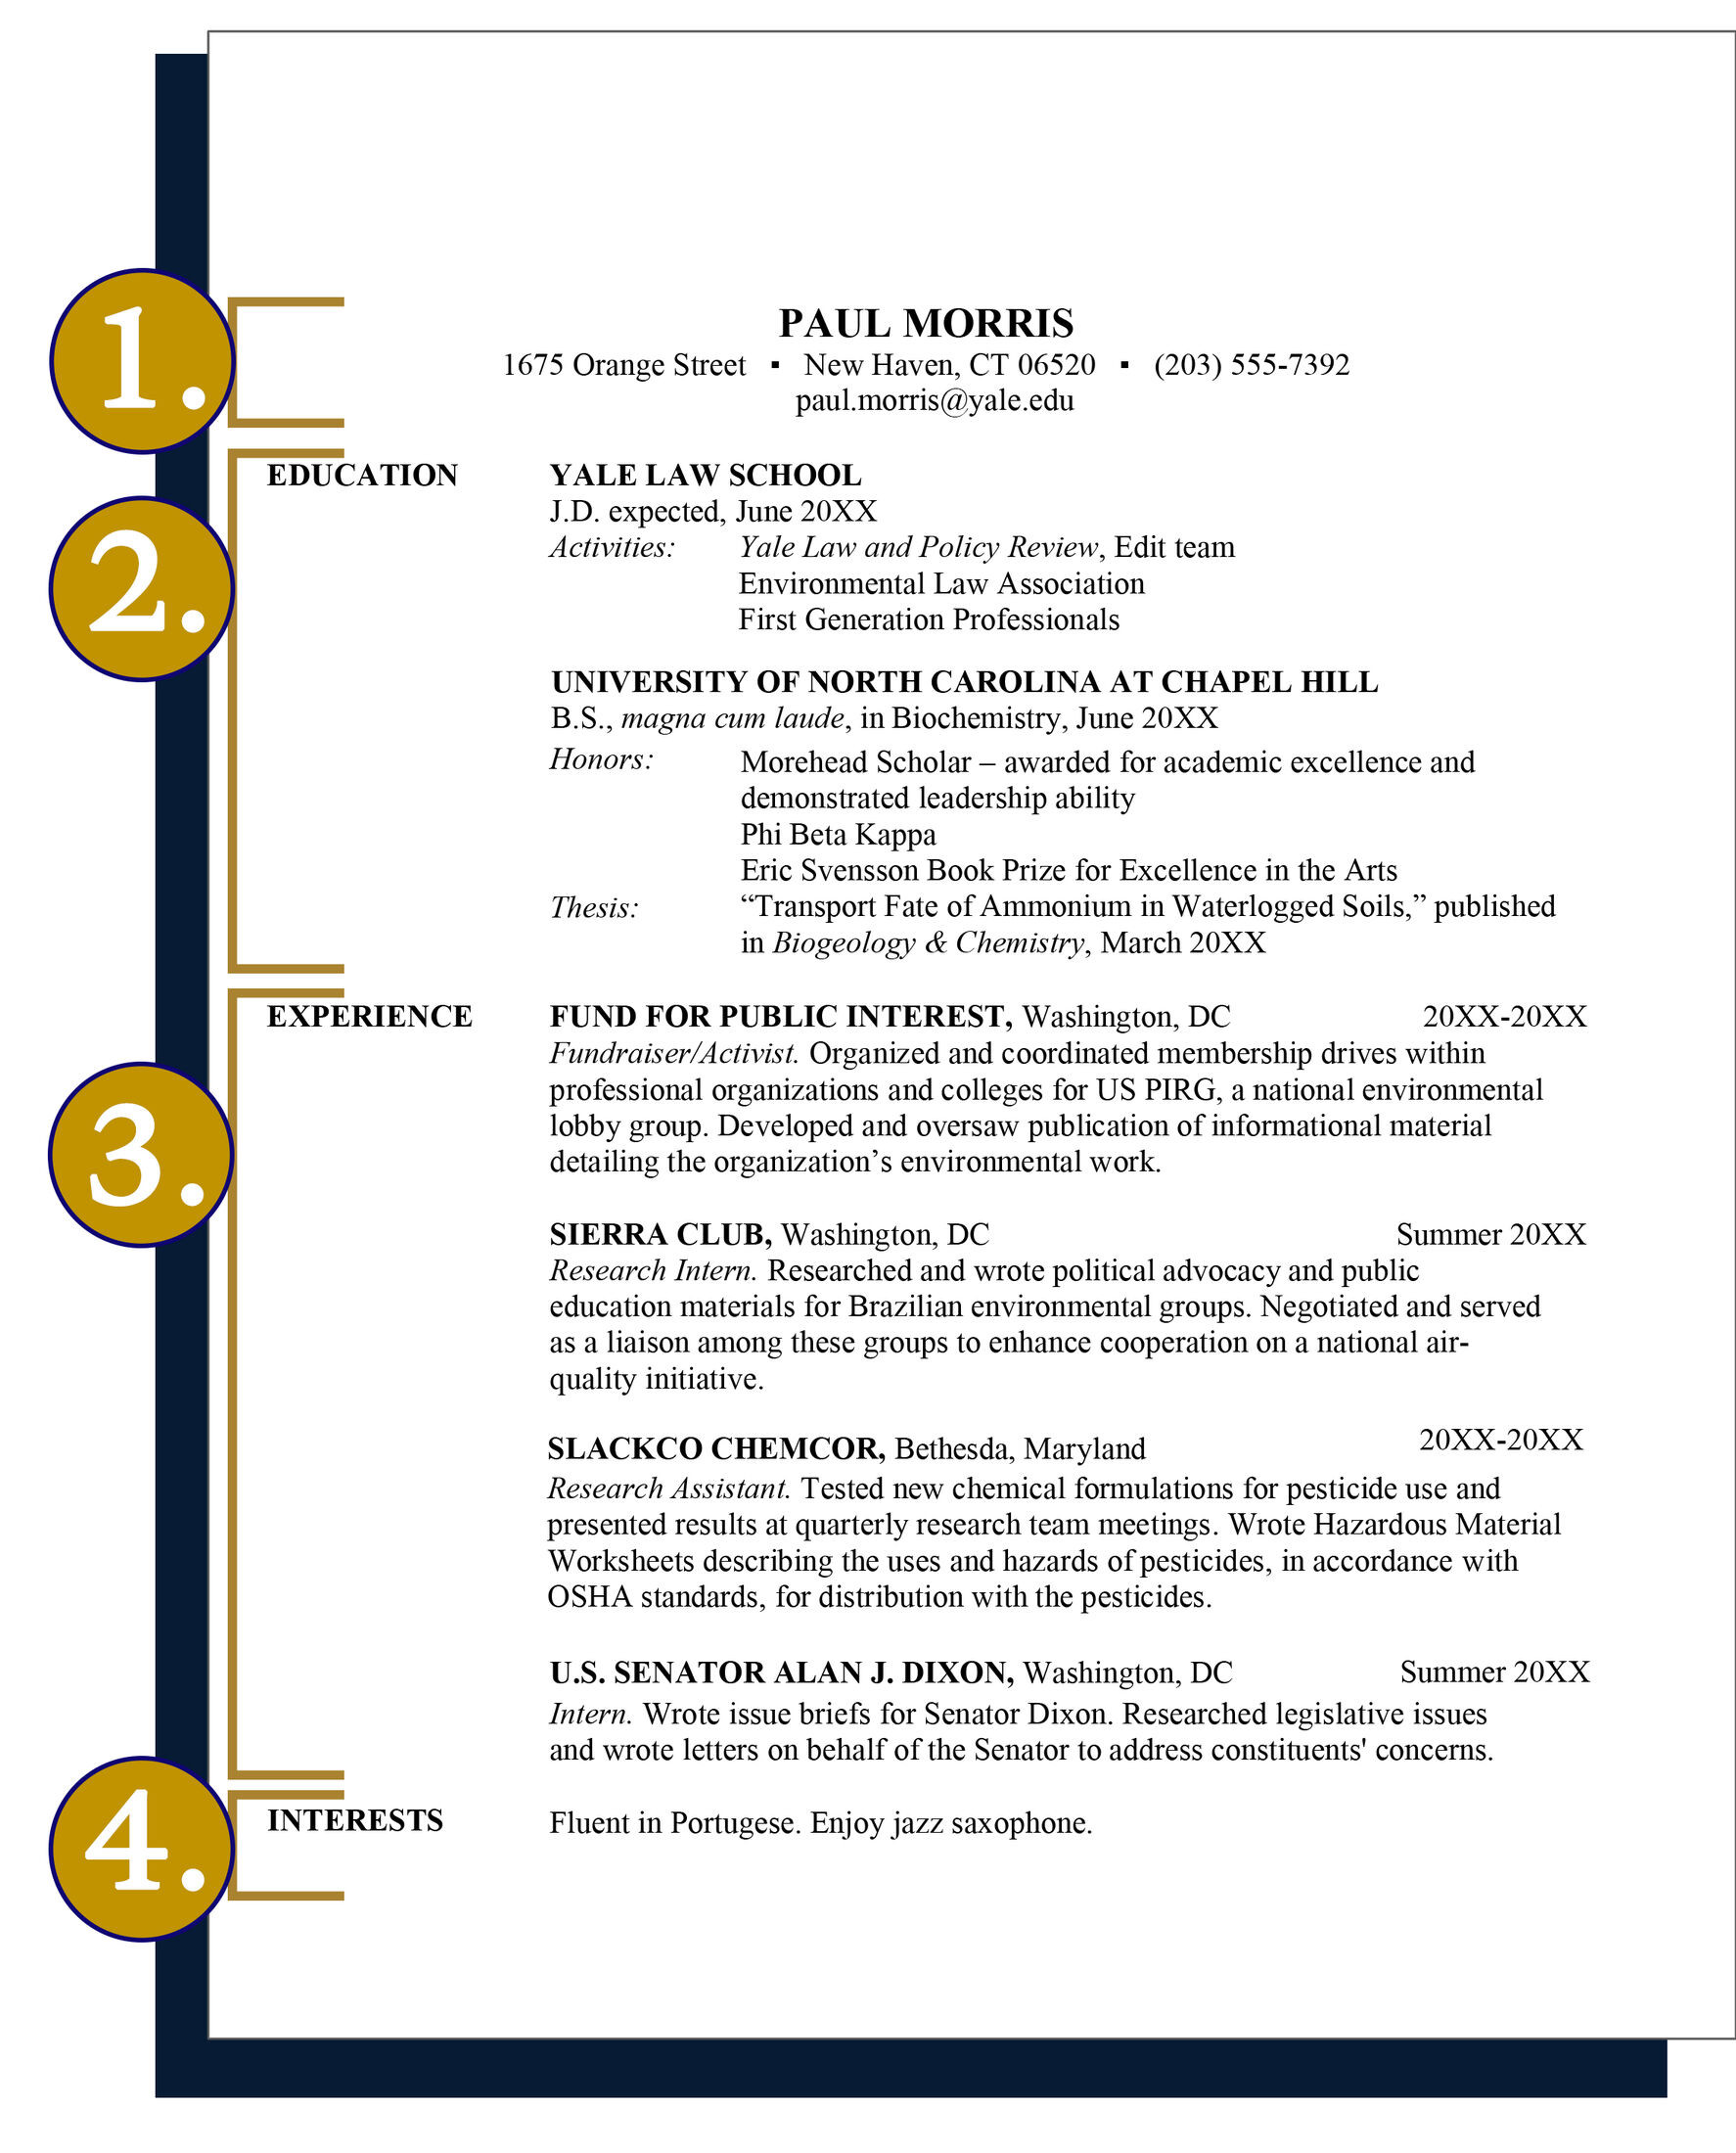 Sample Resume for Law Firm Partner Resume Advice & Samples – Yale Law School